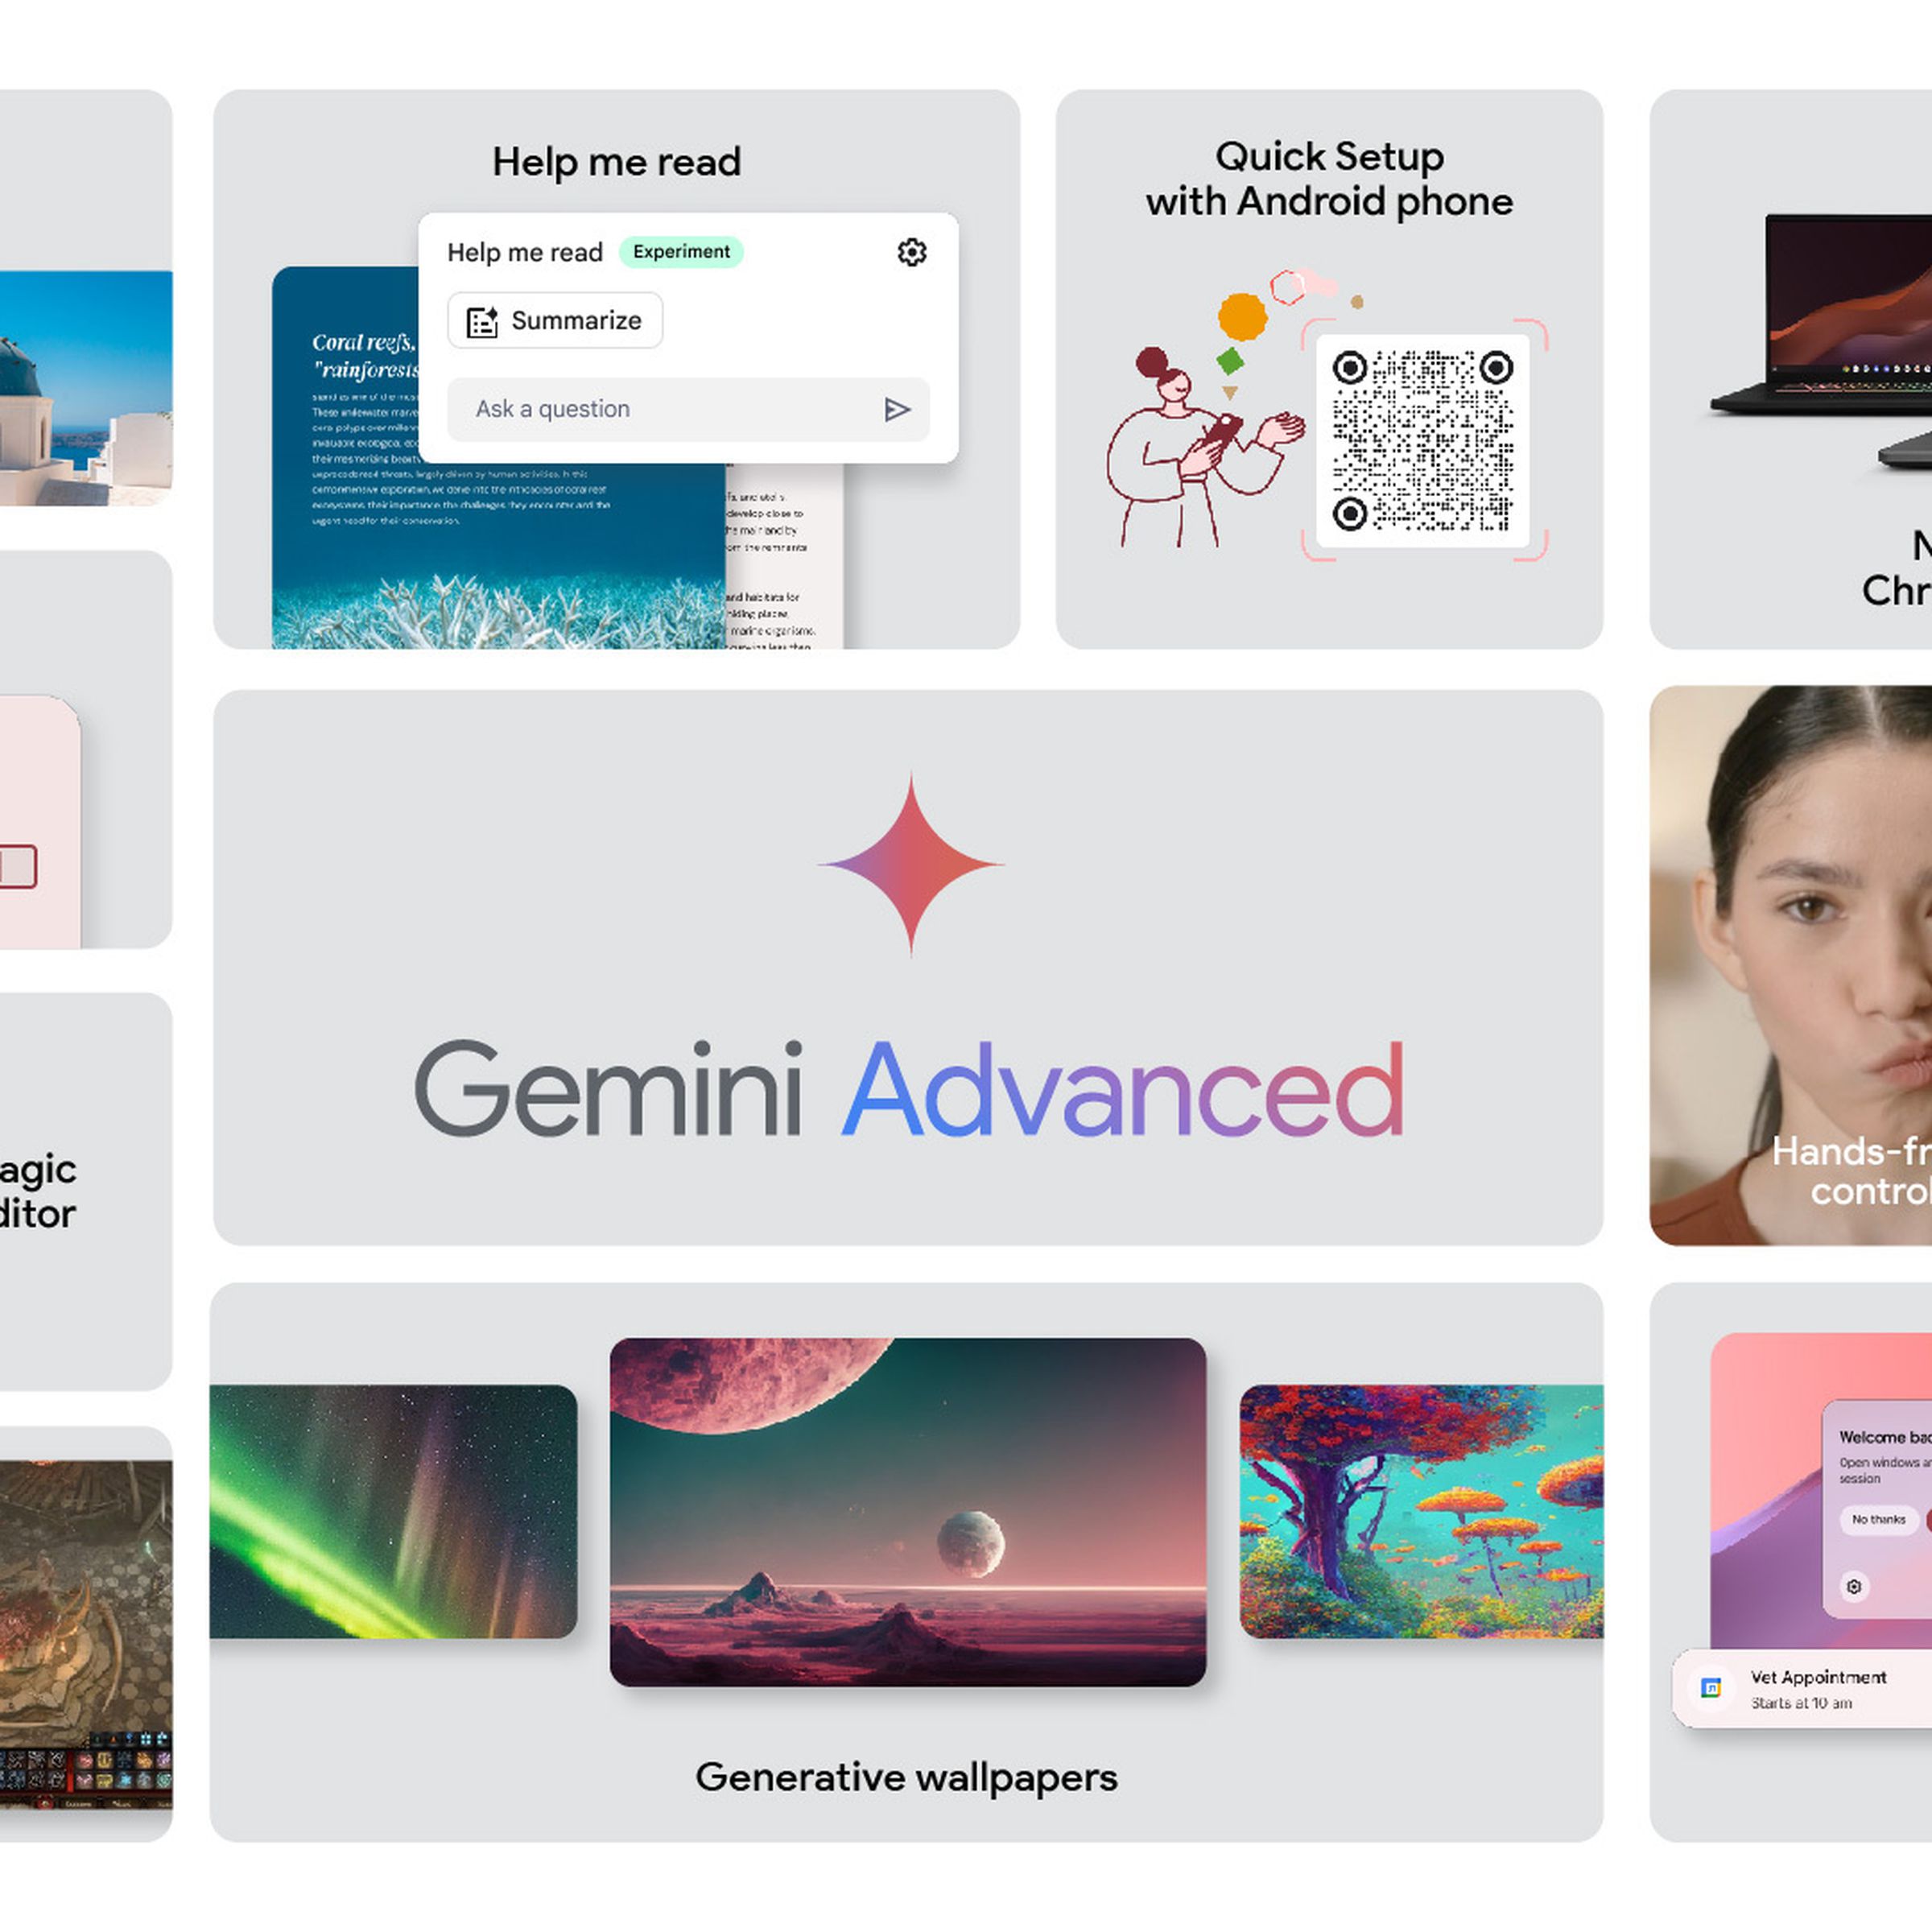 An infographic with several different boxes of information regarding Gemini on Google Chromebook Plus devices.